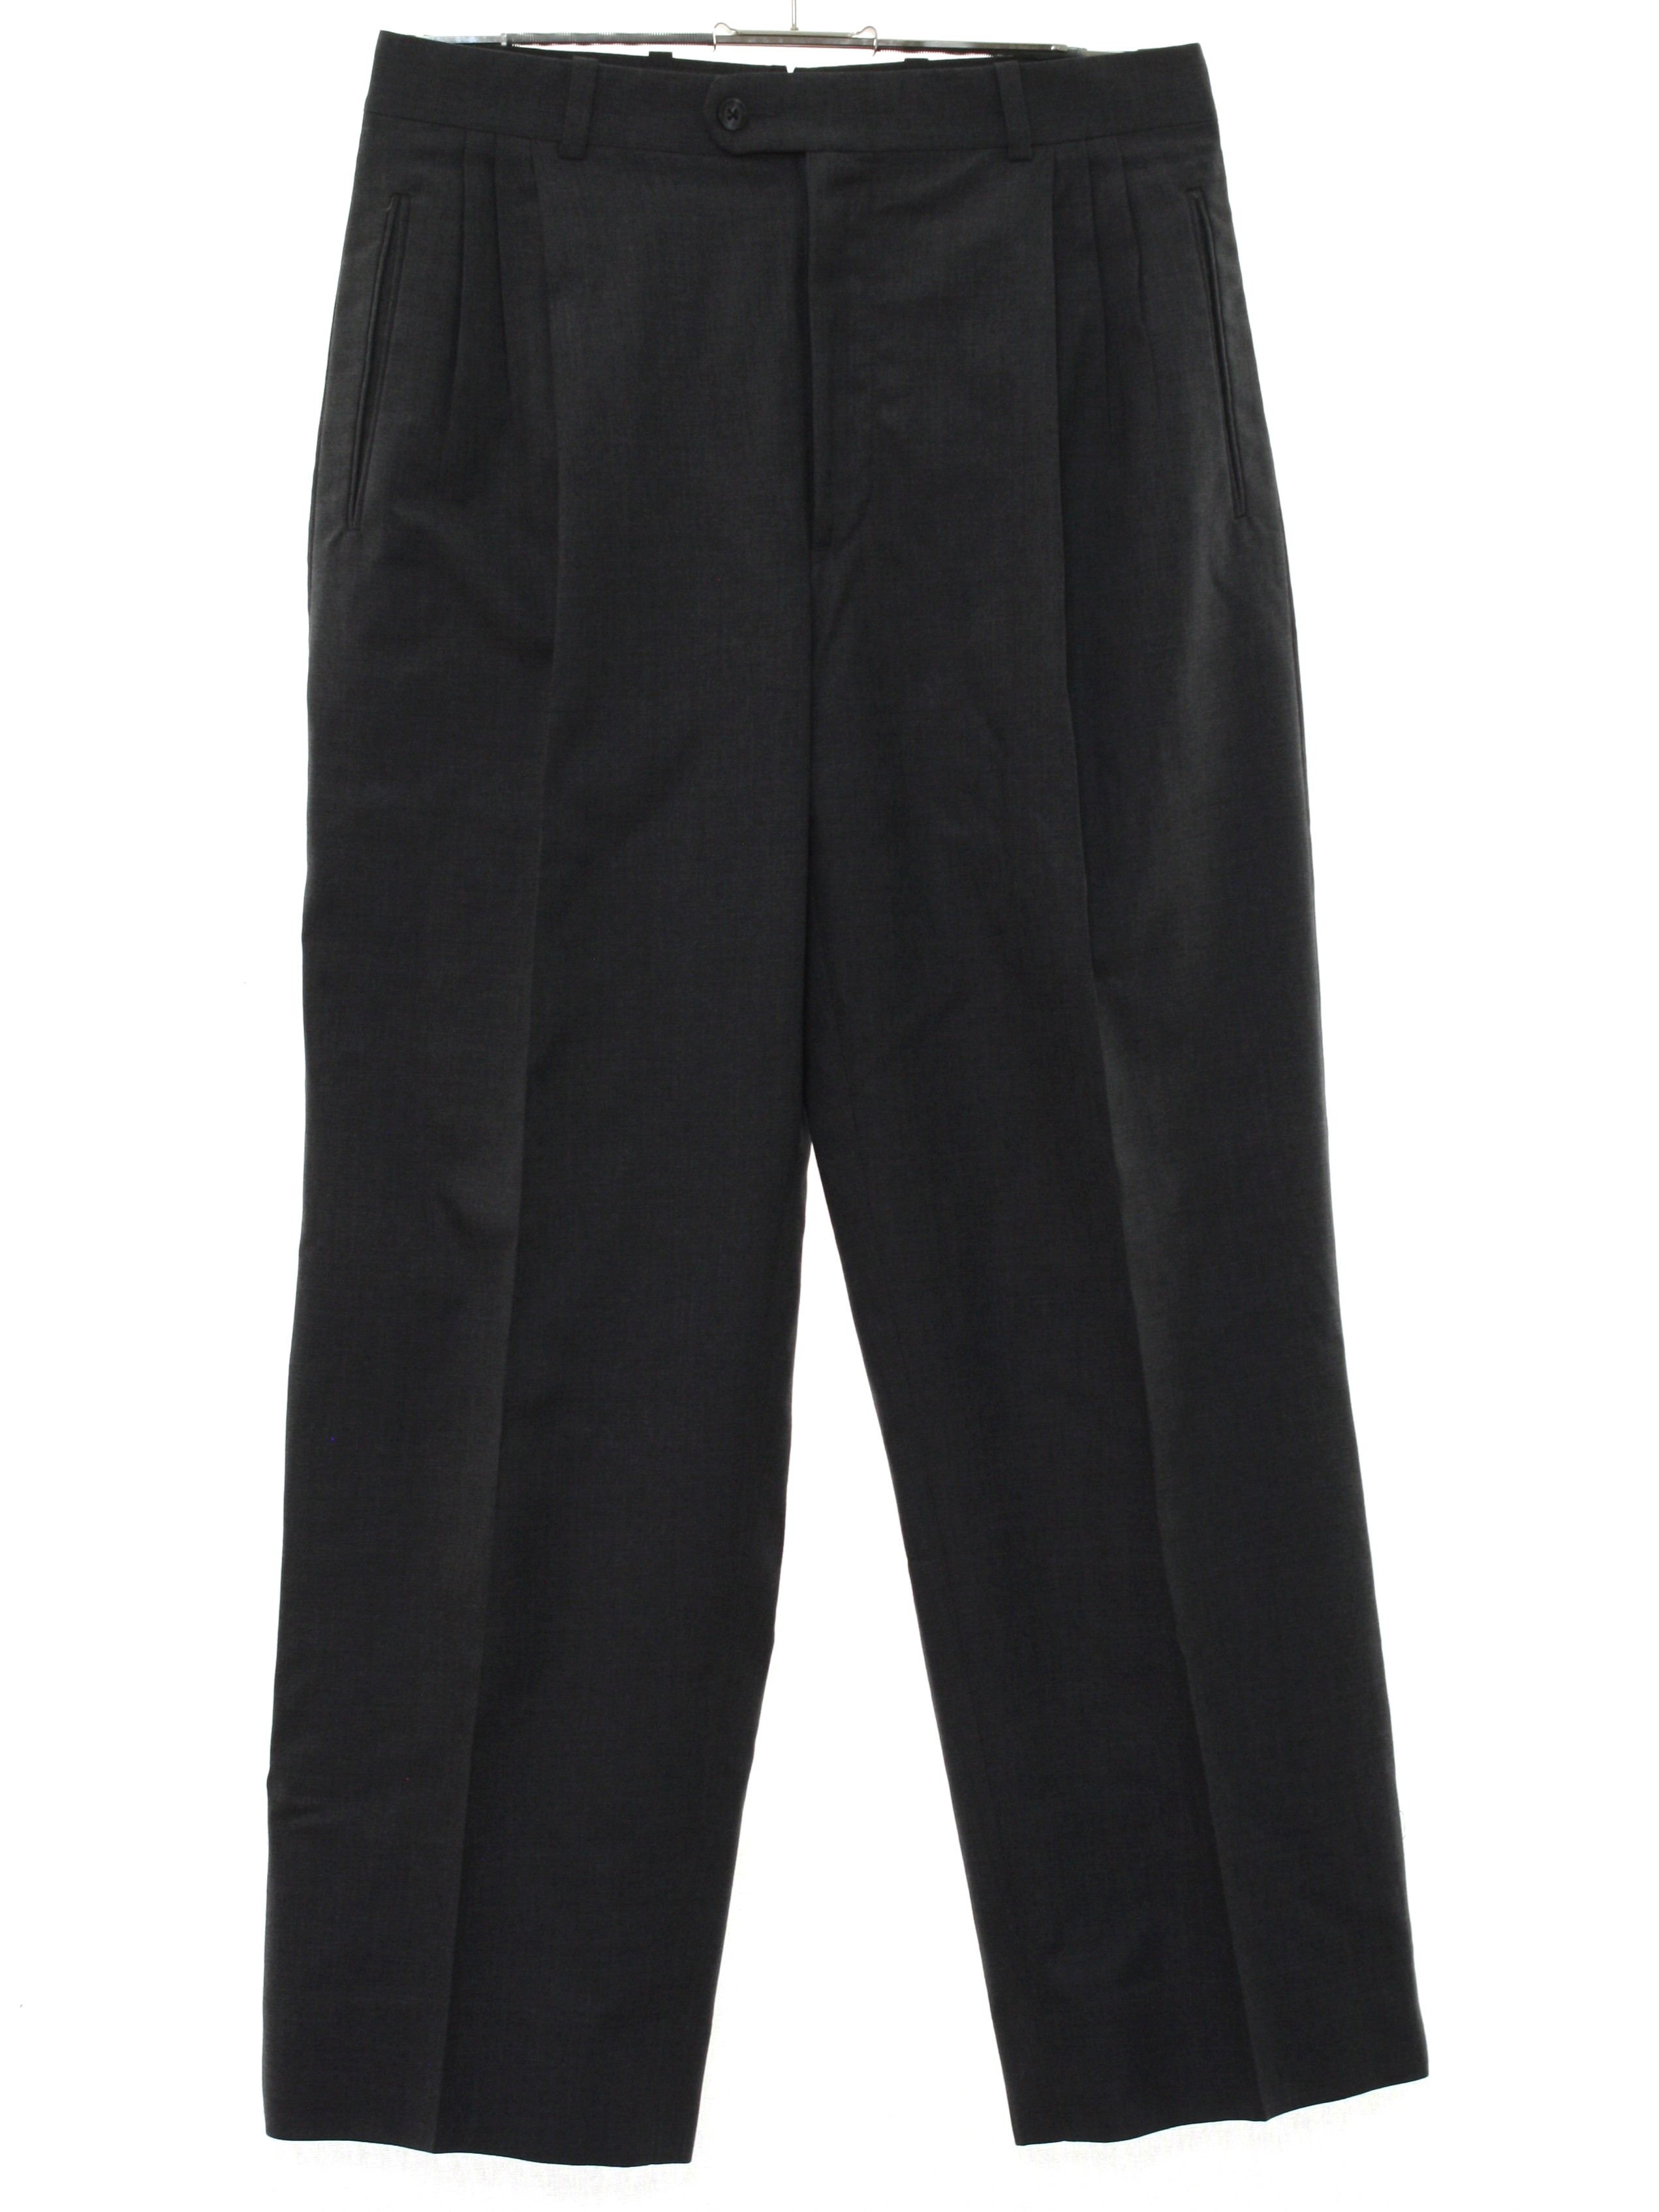 Vintage 80s Pants: 80s -Bensol Trousers- Mens charcoal heather wool ...